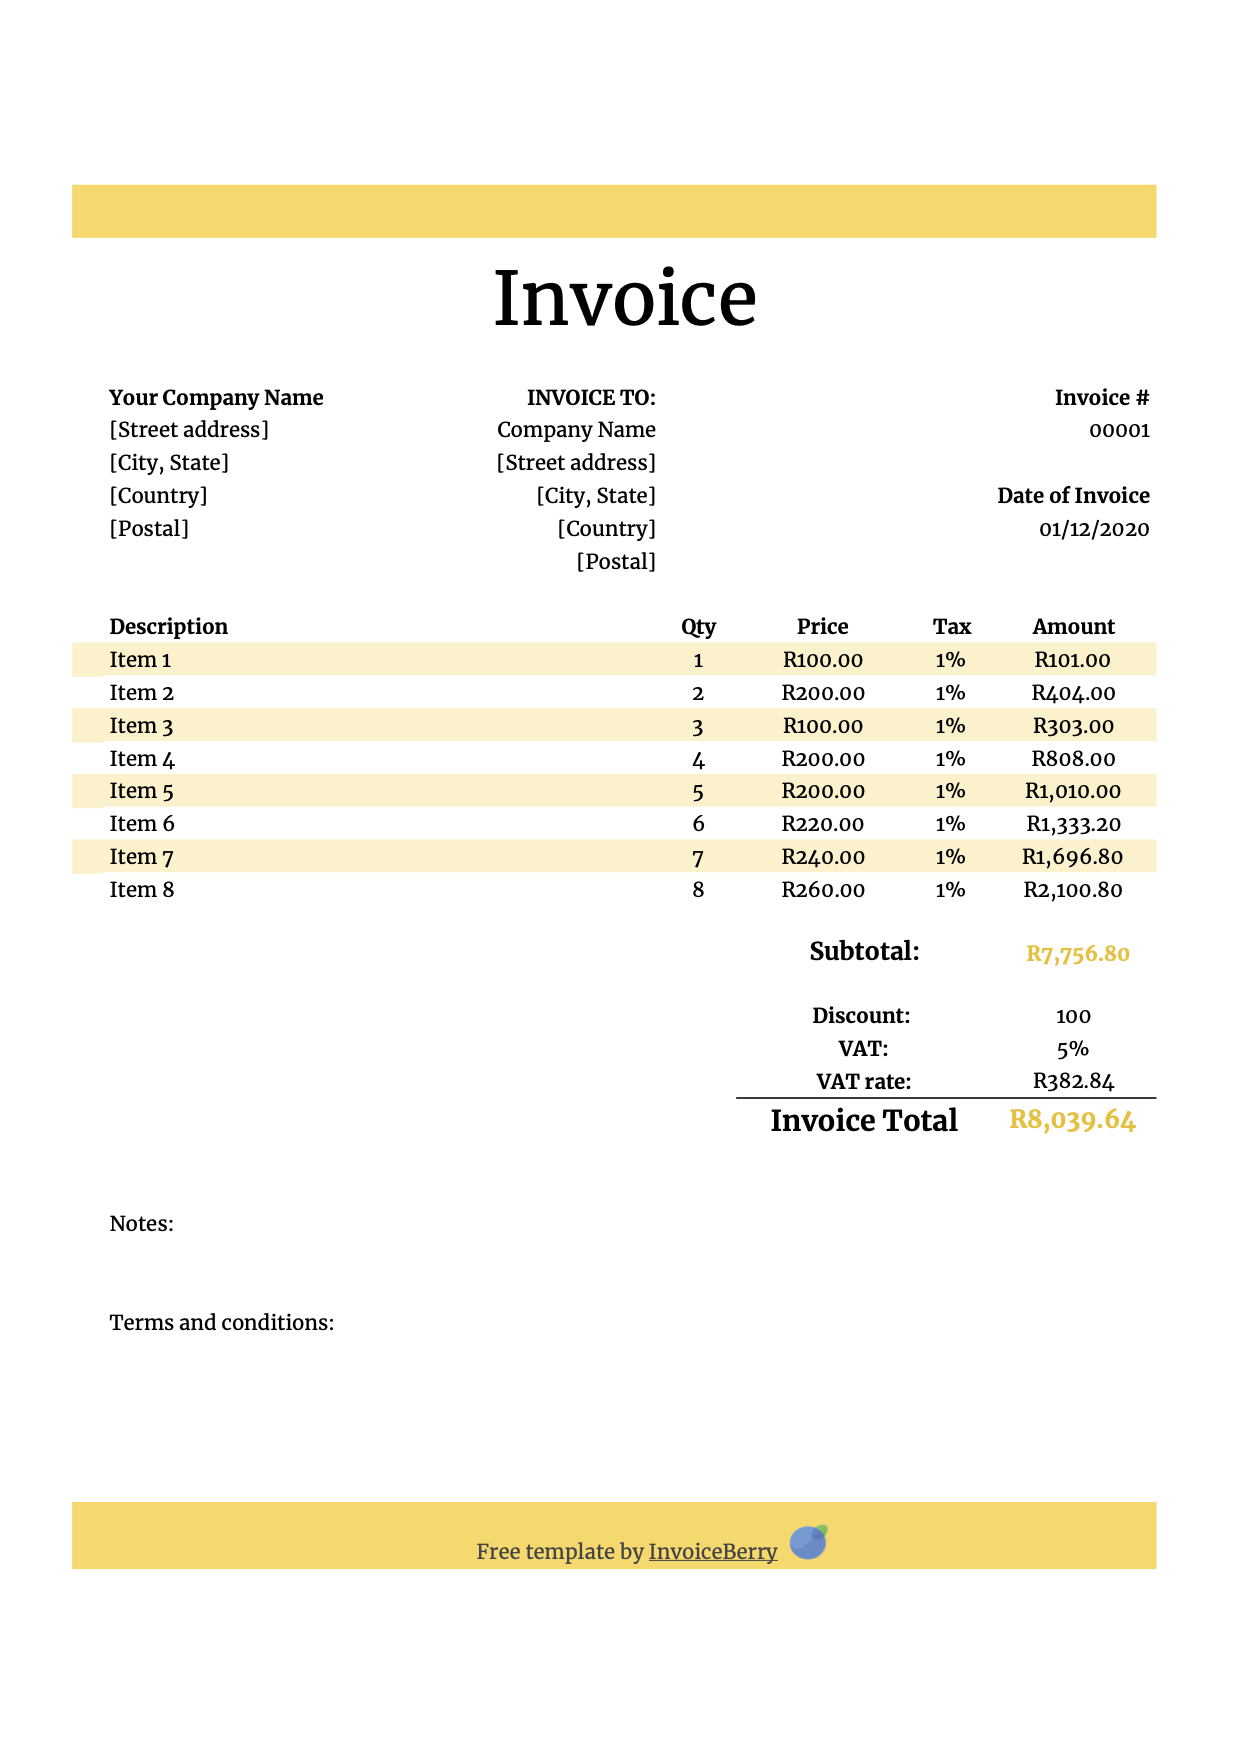 Free Numbers invoice templates get invoice templates for Mac